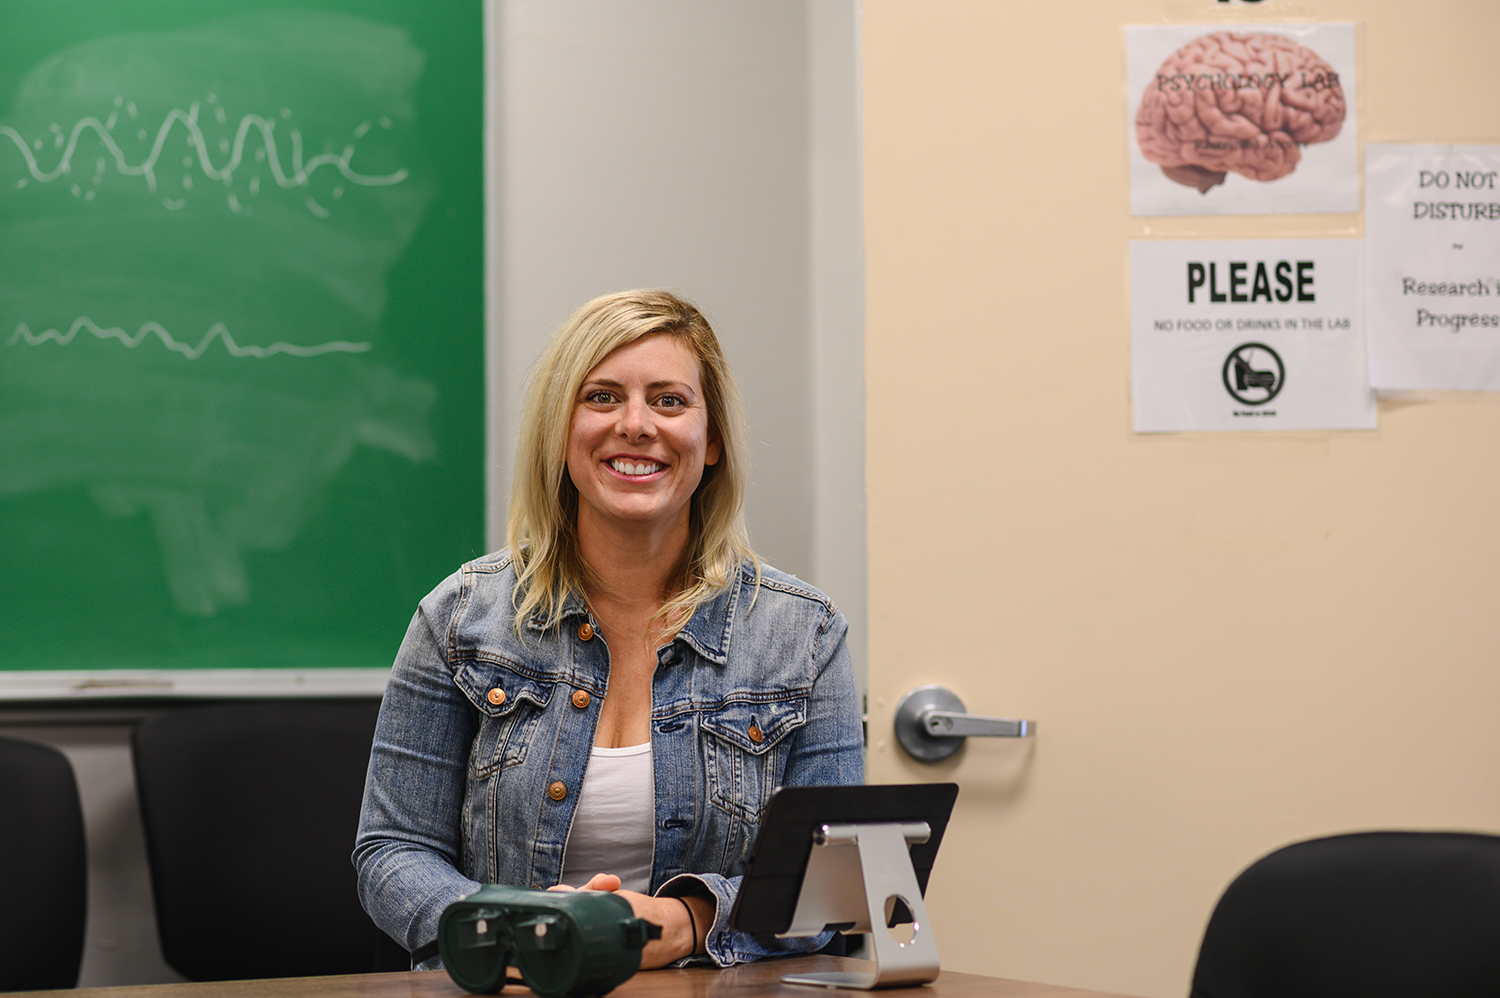 Transylvania professor opens doors to expanded psych lab research